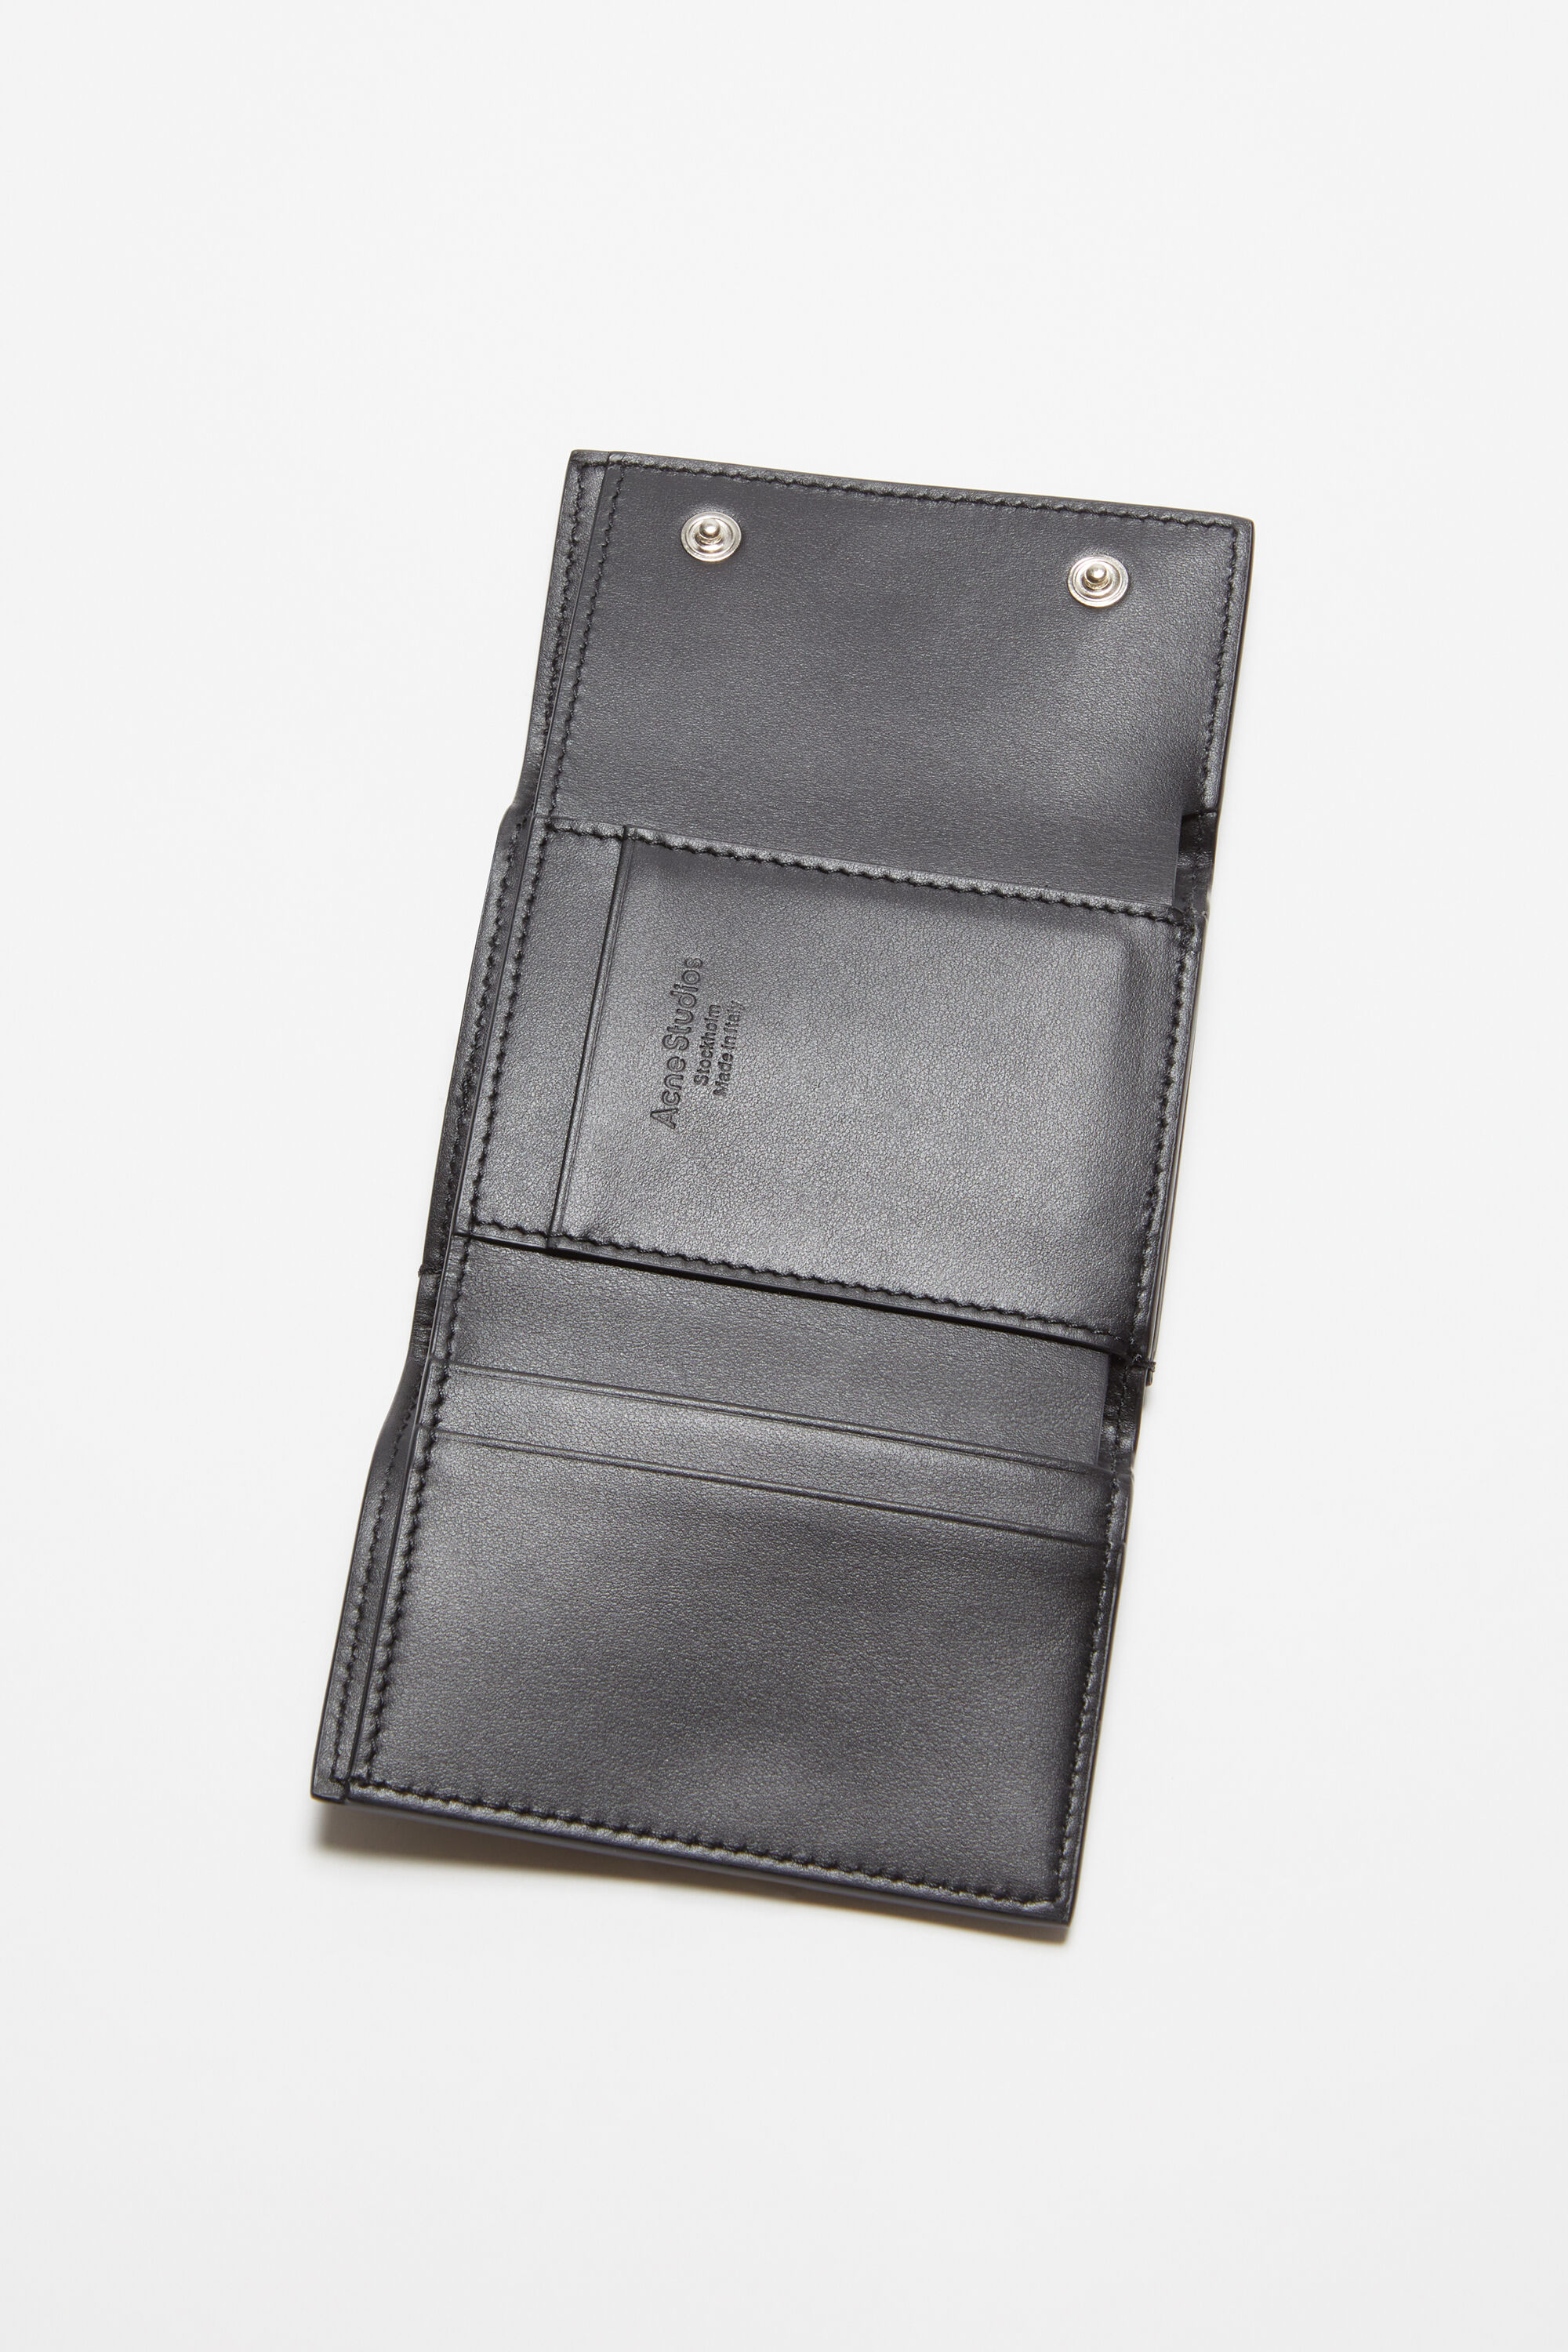 Acne Studios - Trifold leather wallet - Black